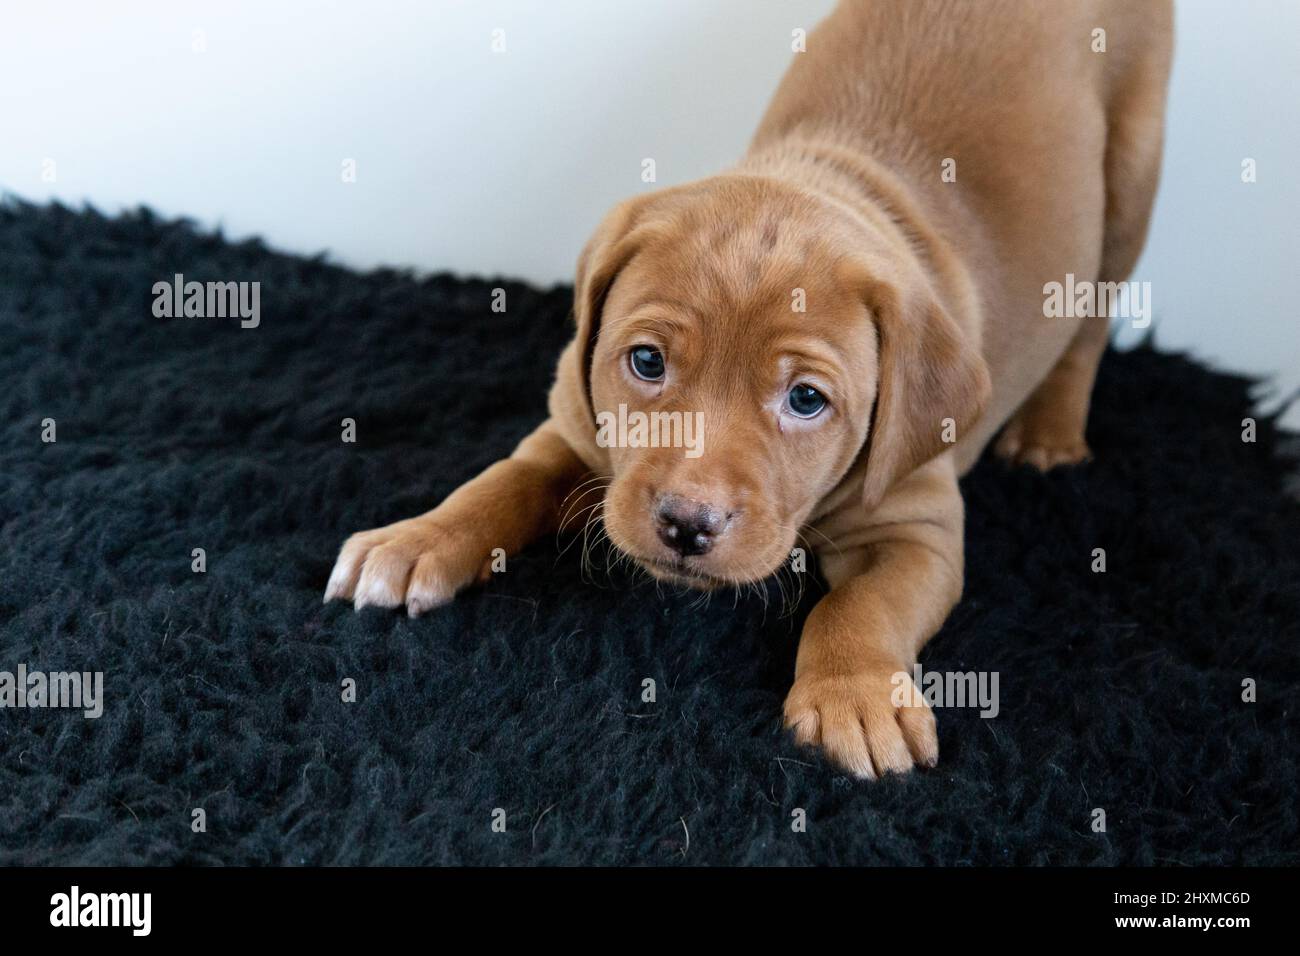 A red fox labrador retriever puppy in the play stance. Stock Photo